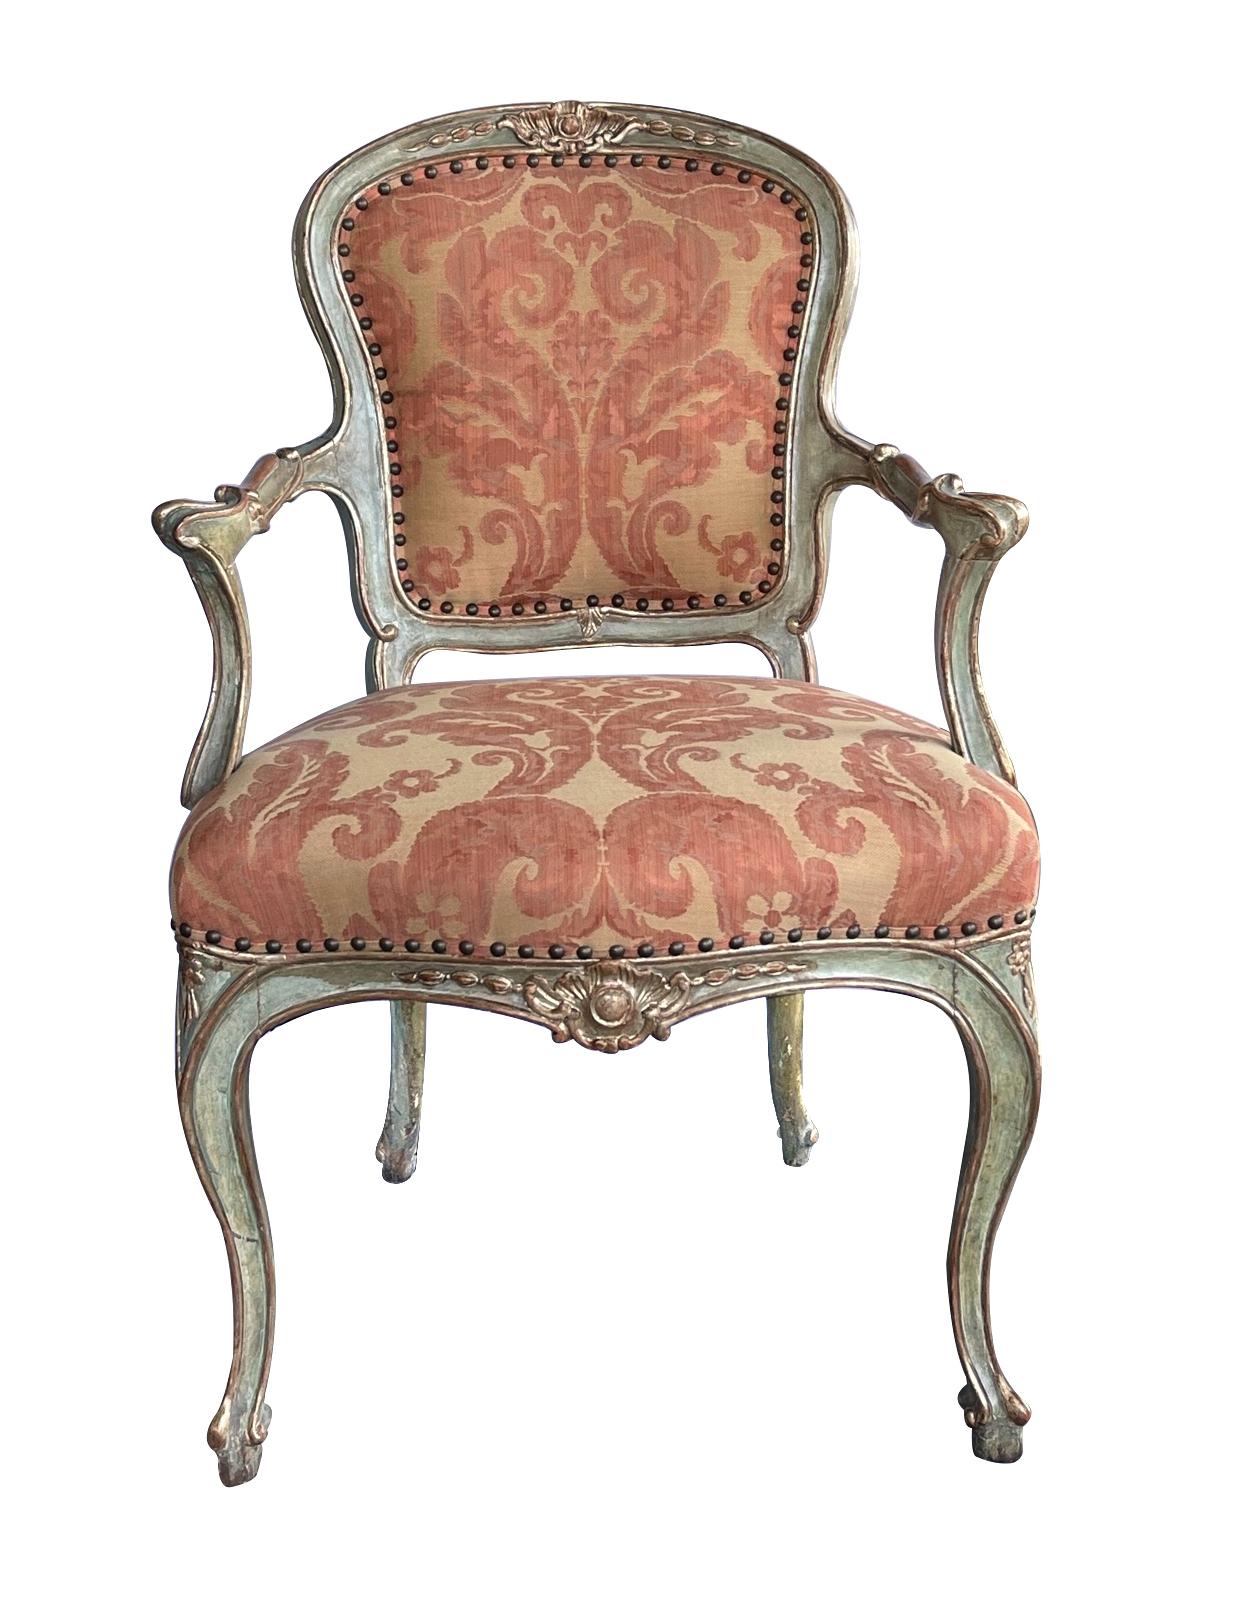 Shapely Pair of Italian Rococo Style Aqua Painted and Parcel-Gilt Armchairs For Sale 5